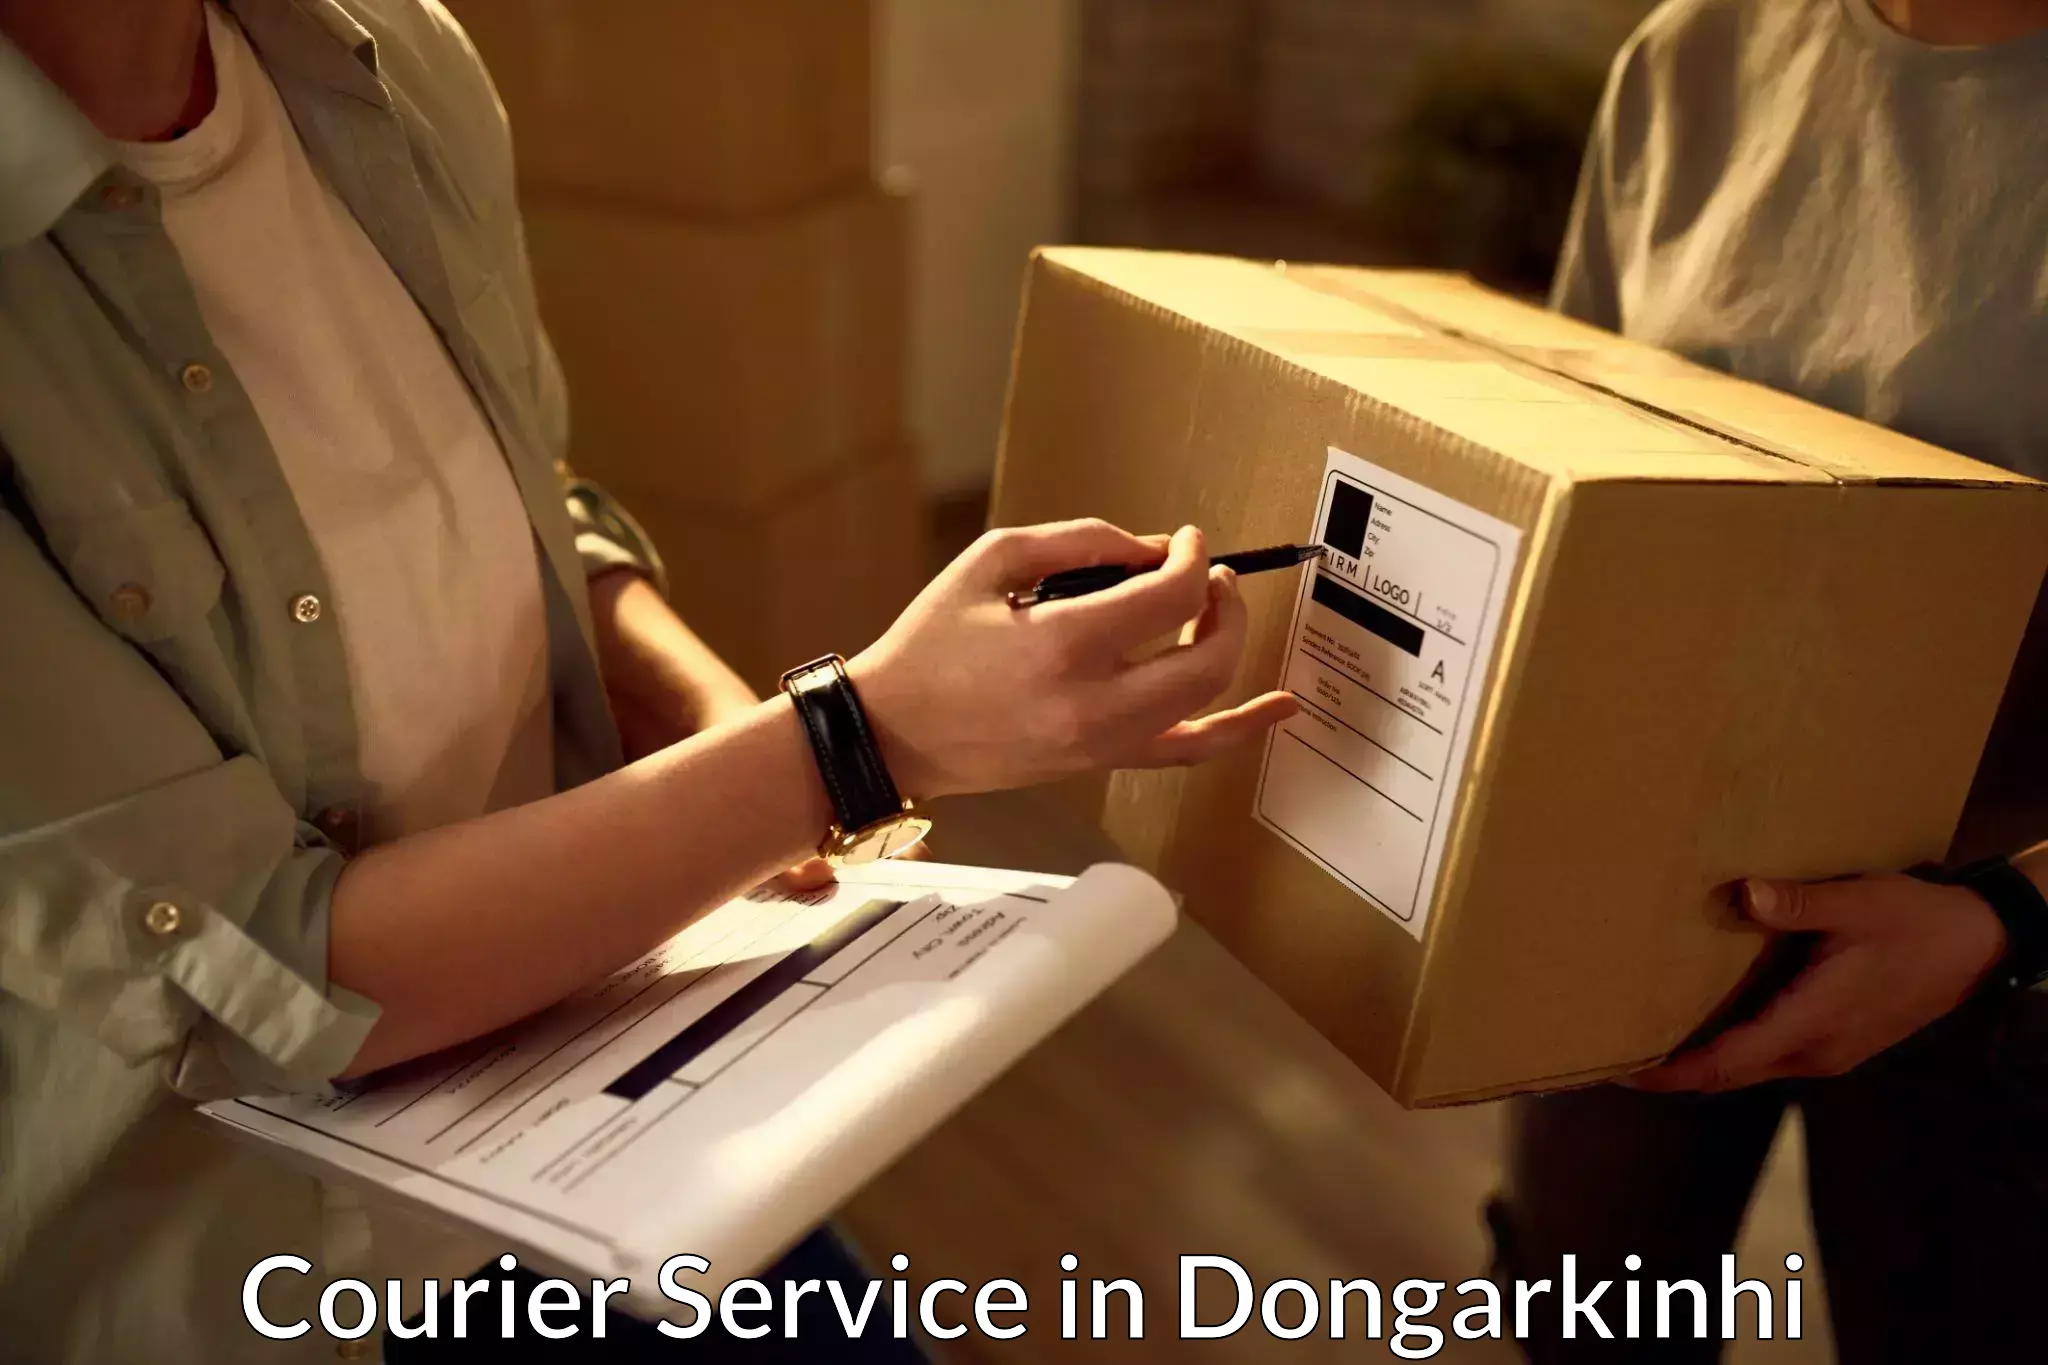 Global delivery options in Dongarkinhi